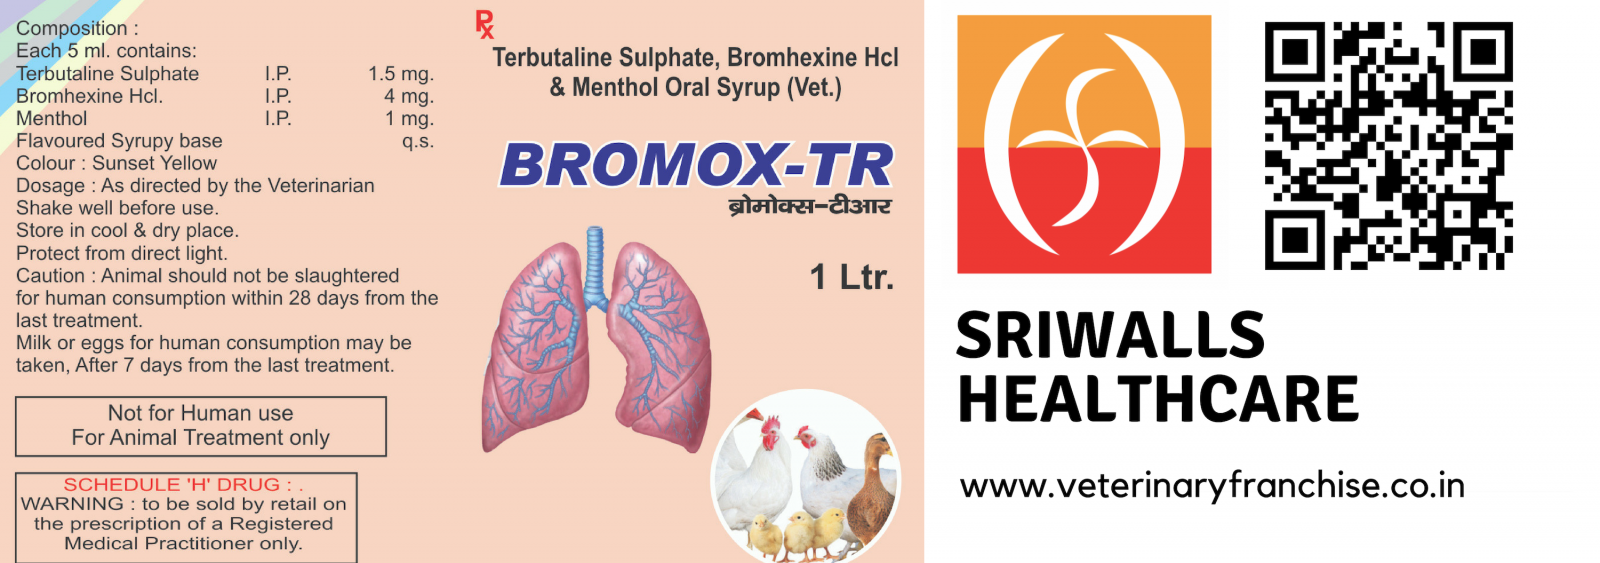 Terbutaline Sulphate + Bromhexine HCL + Menthol Syrup